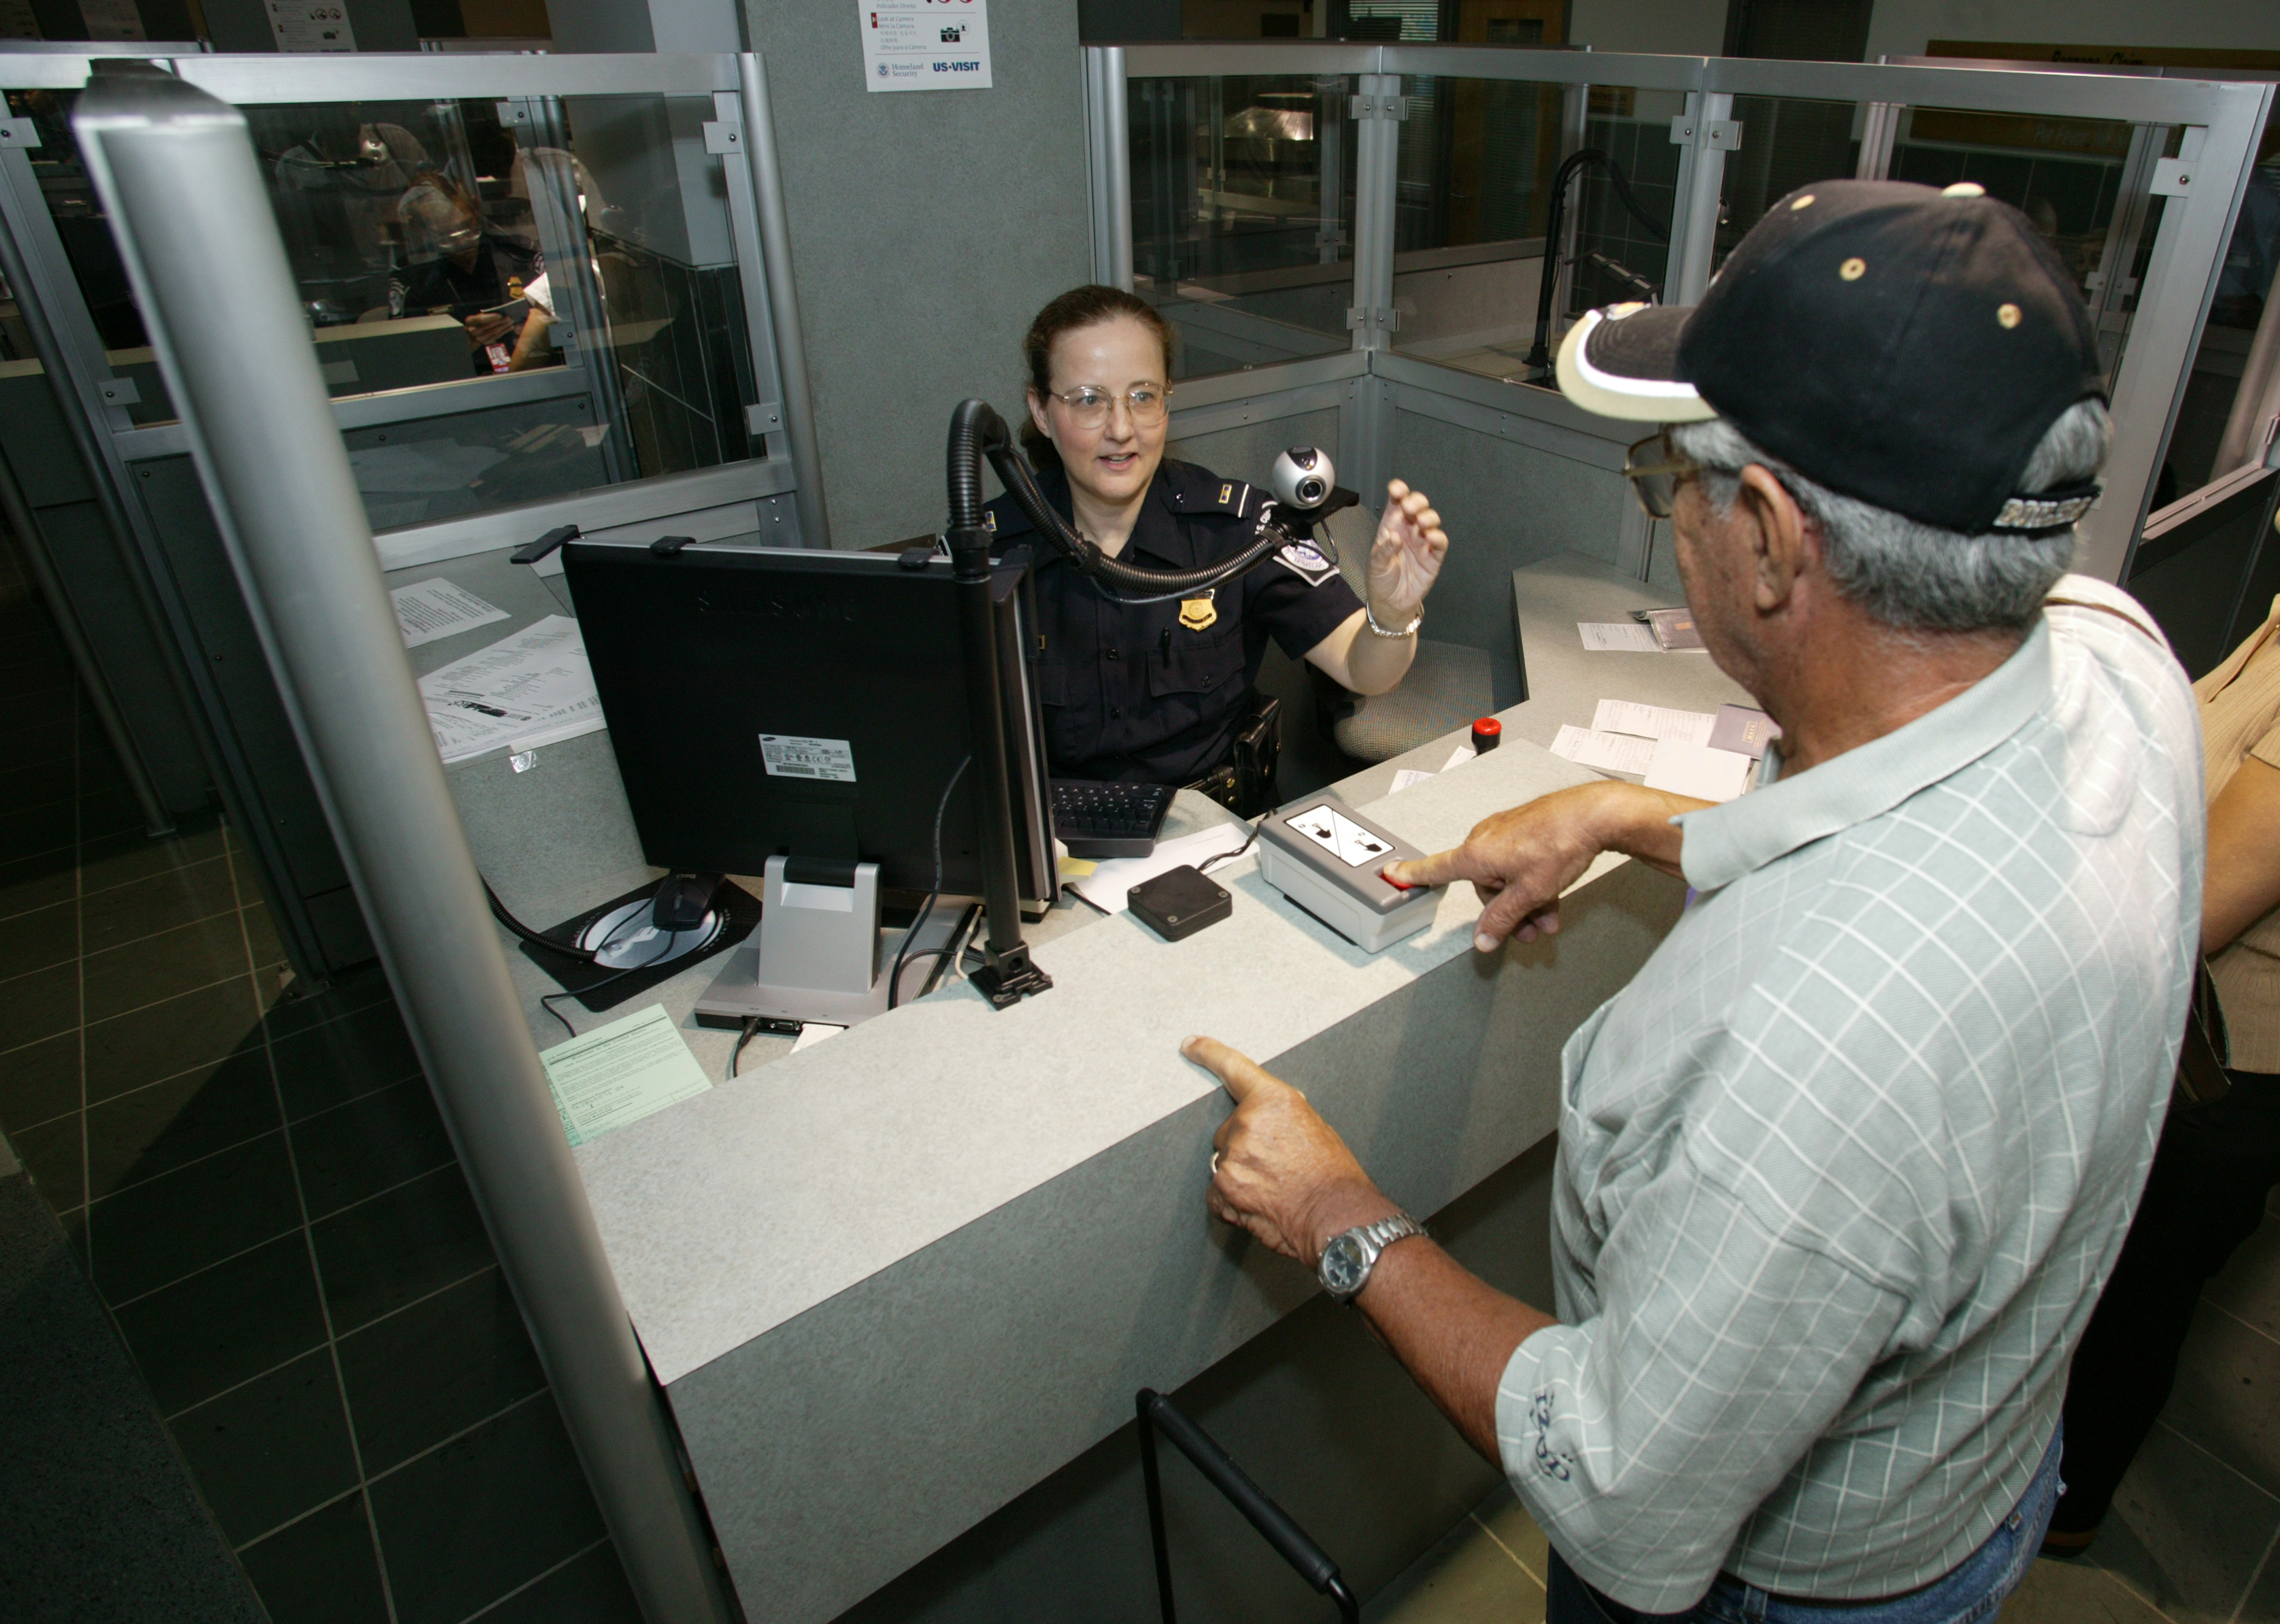 A CBP Officer uses new technologies to process passengers.